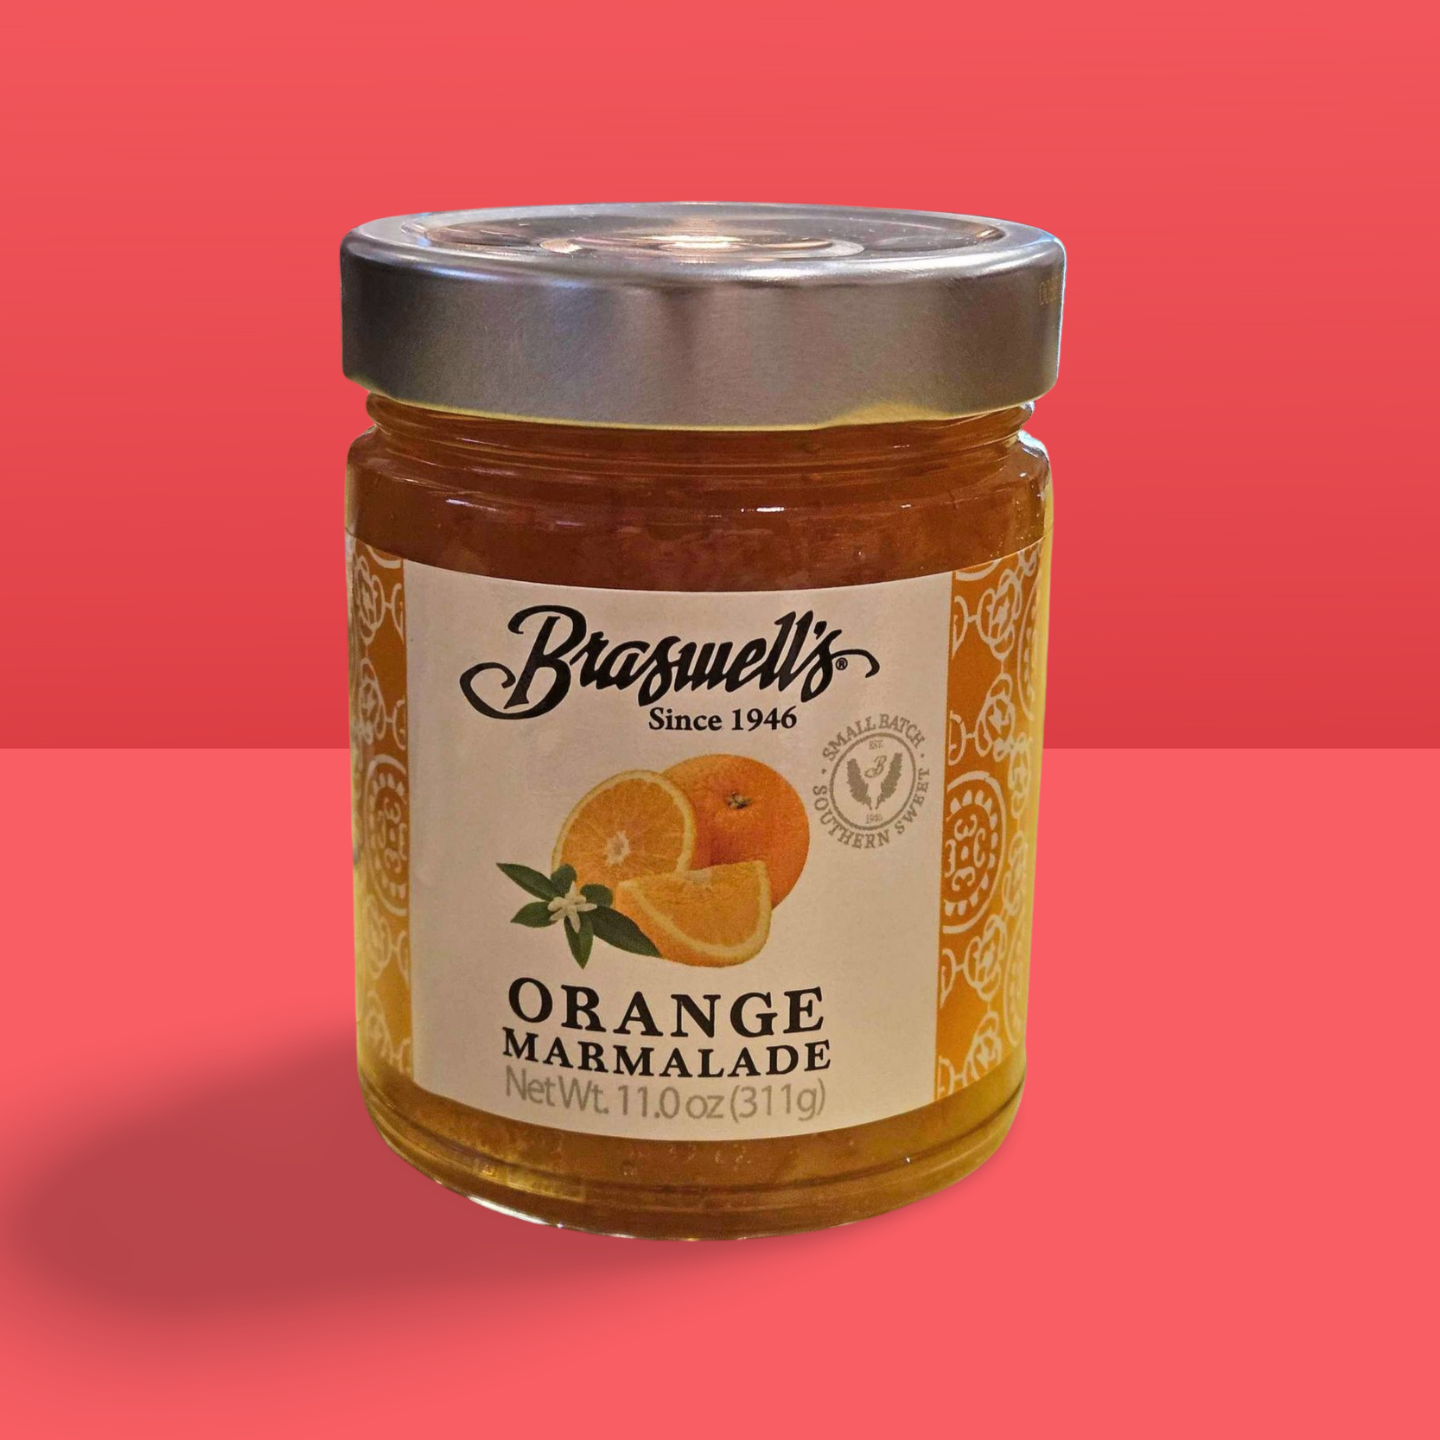 Braswell's Orange Marmalade 11 oz - Dusty's Country Store